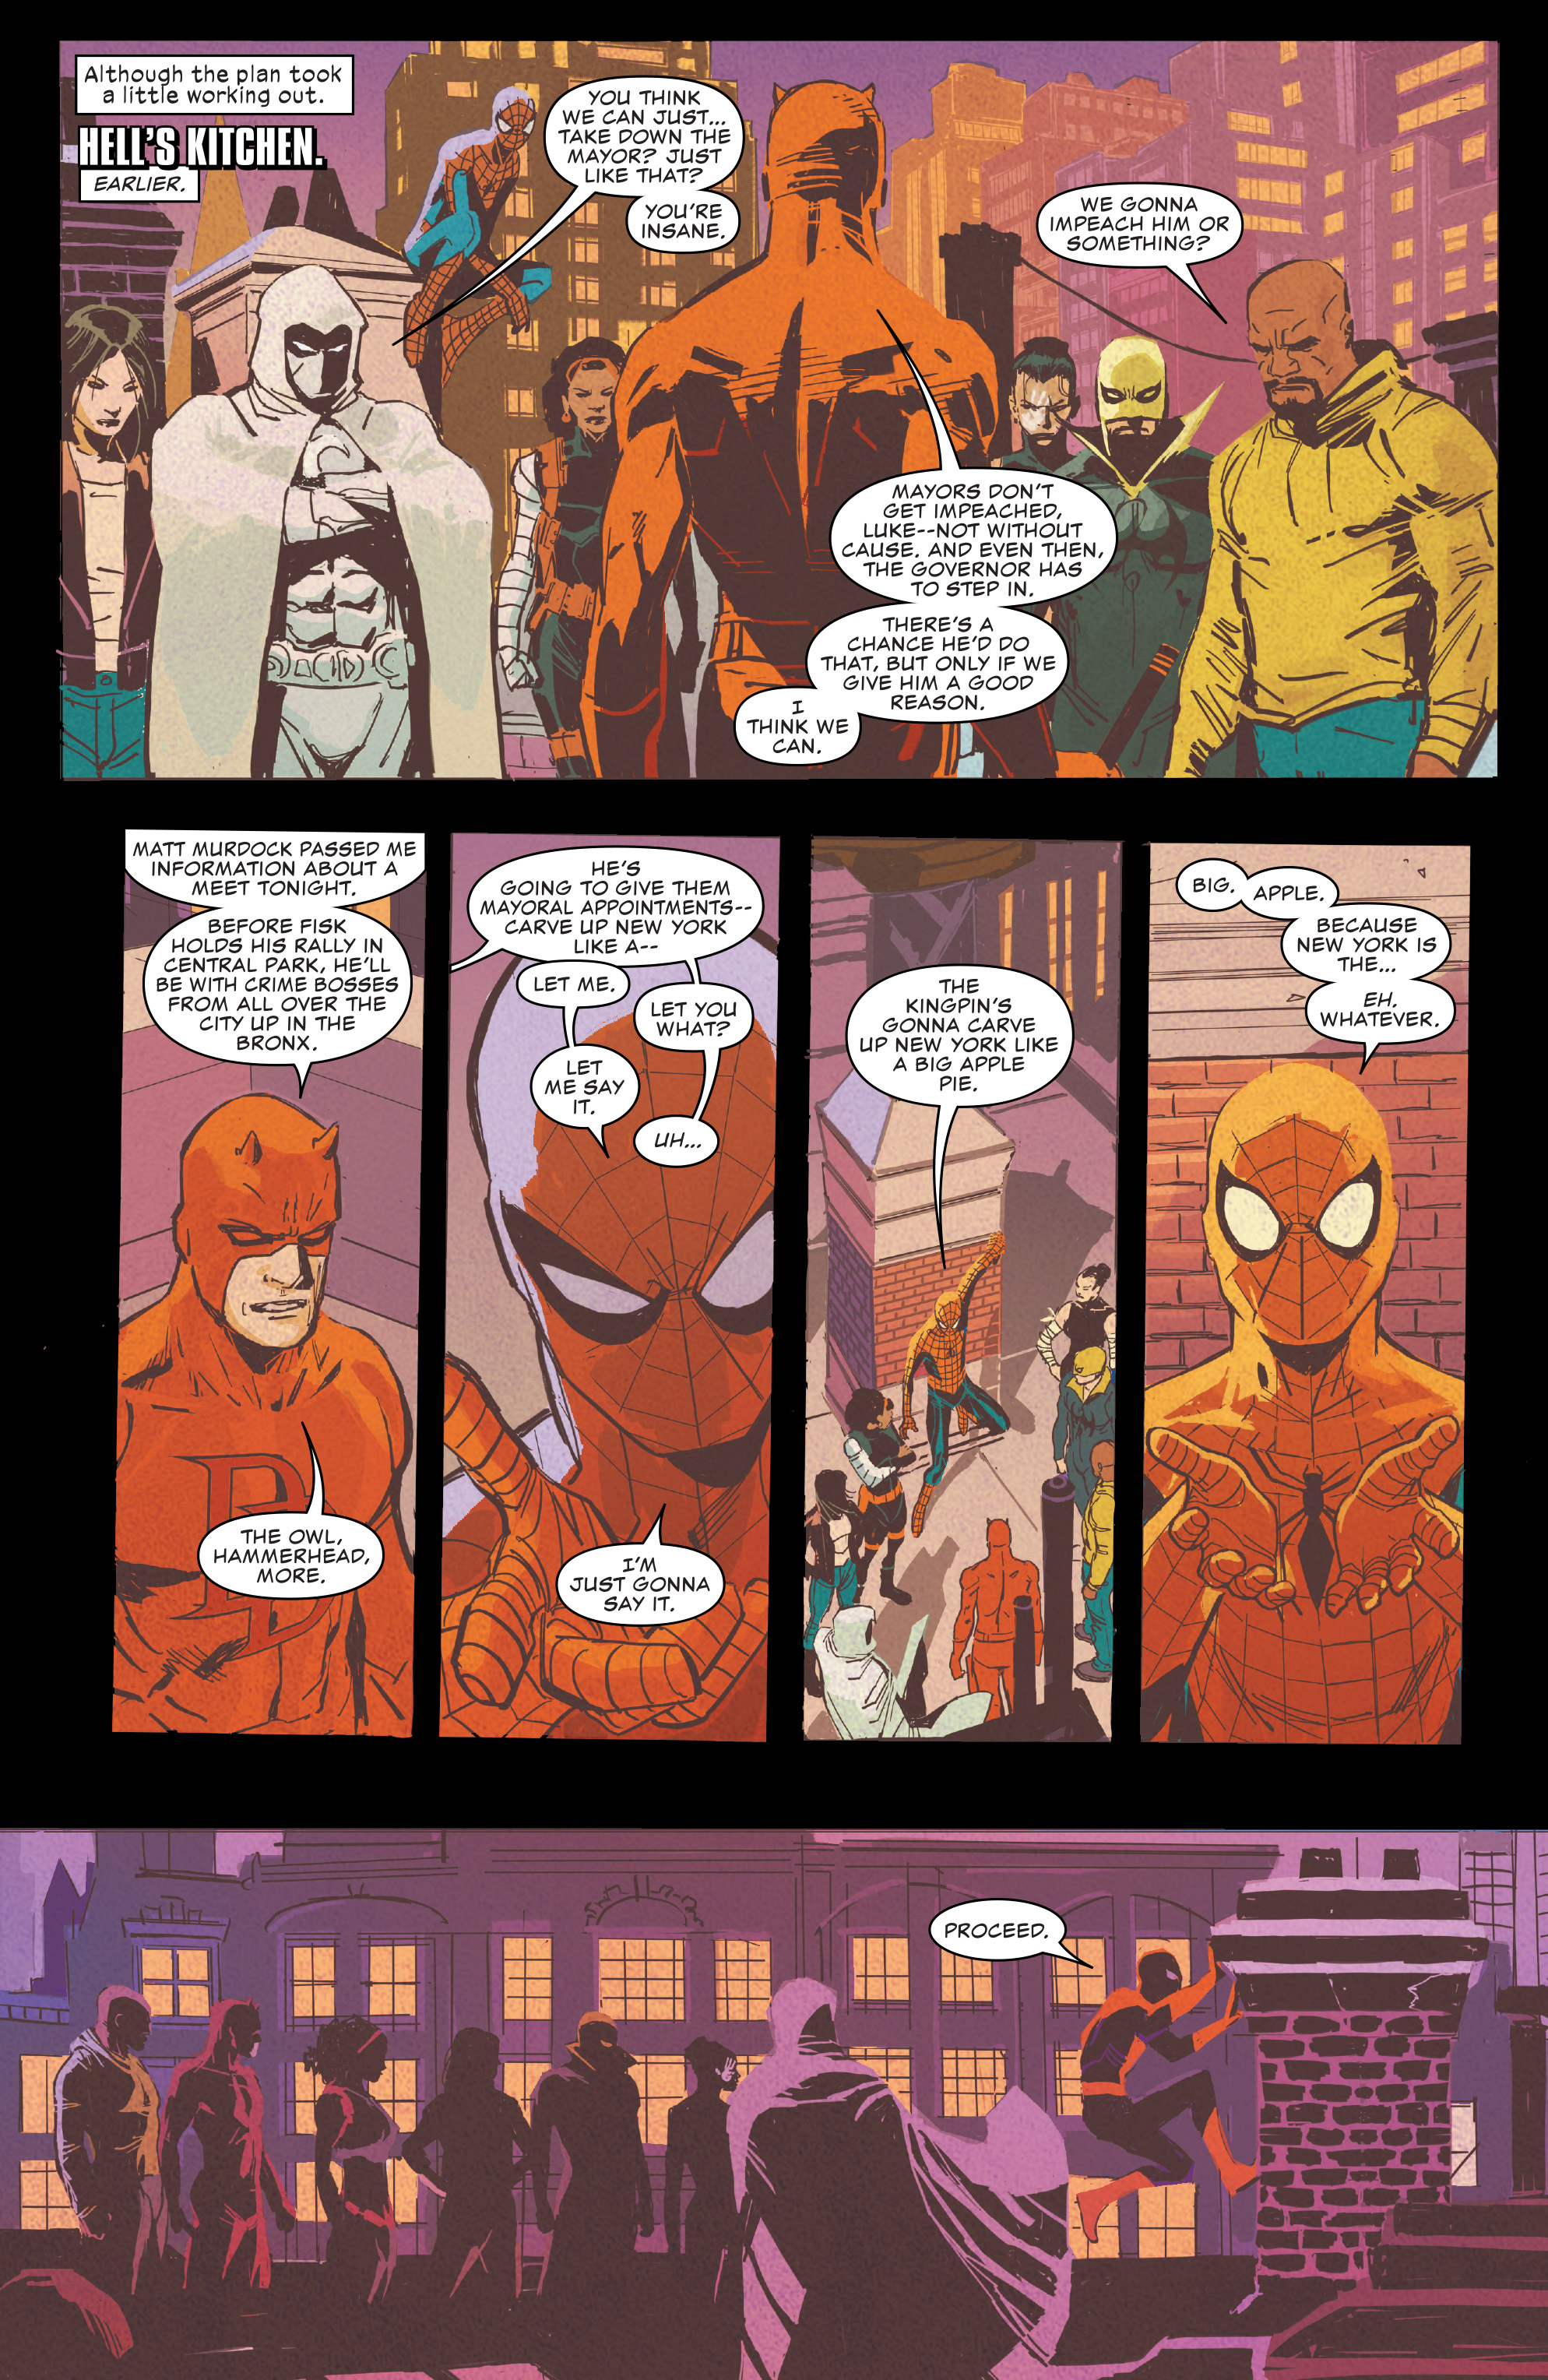 Daredevil (2016-): Chapter 600 - Page 4